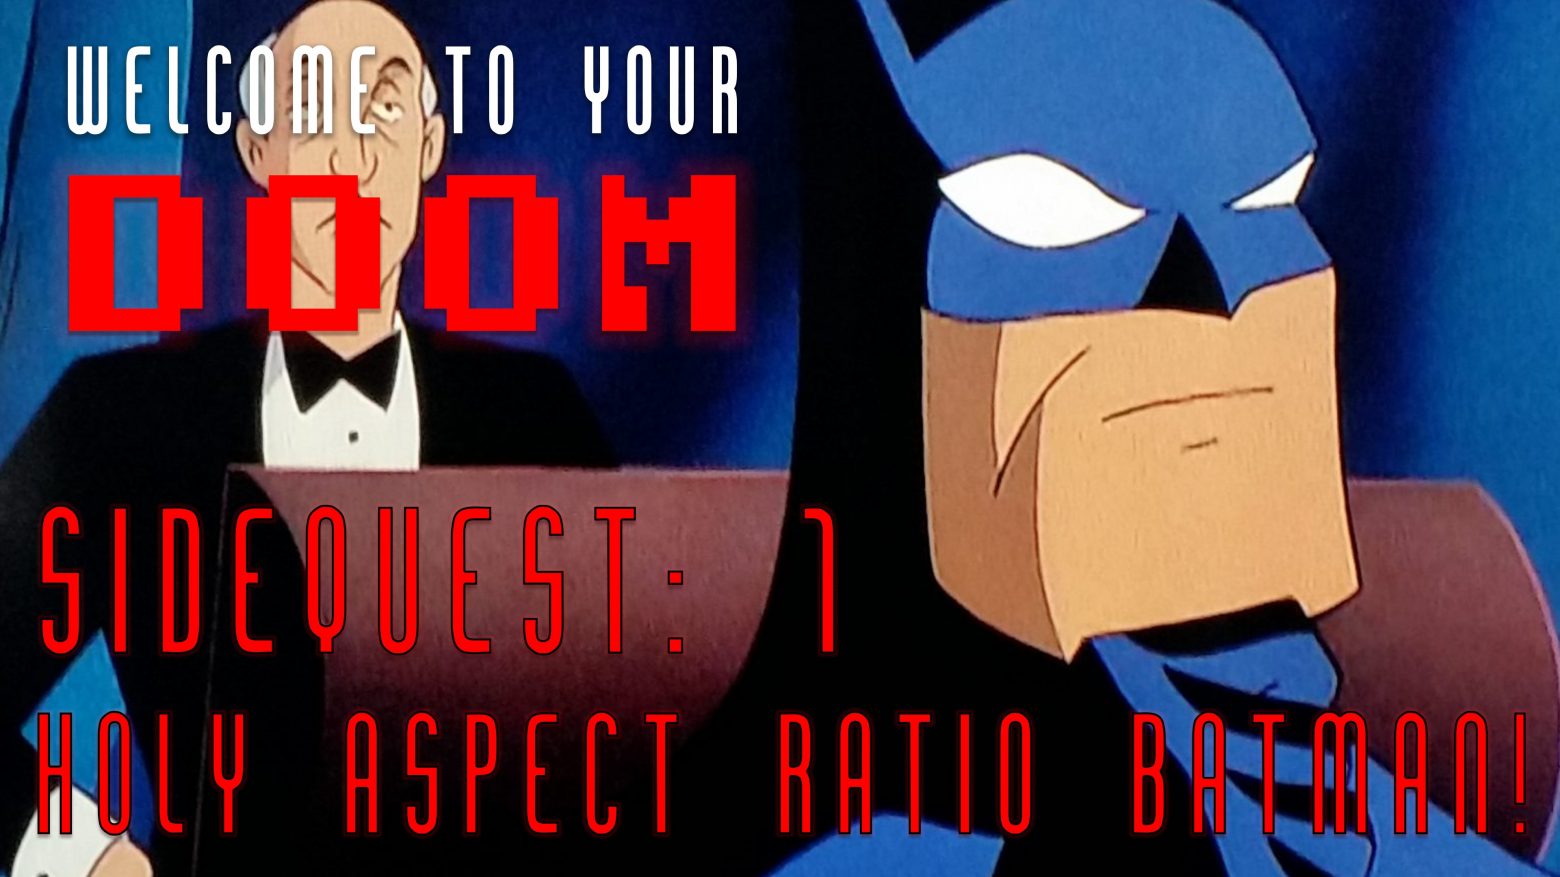 publikum bryder daggry sweater Sidequest 1: Batman - Aspect Ratio of the Phantasm - Welcome To Your Doom  Show